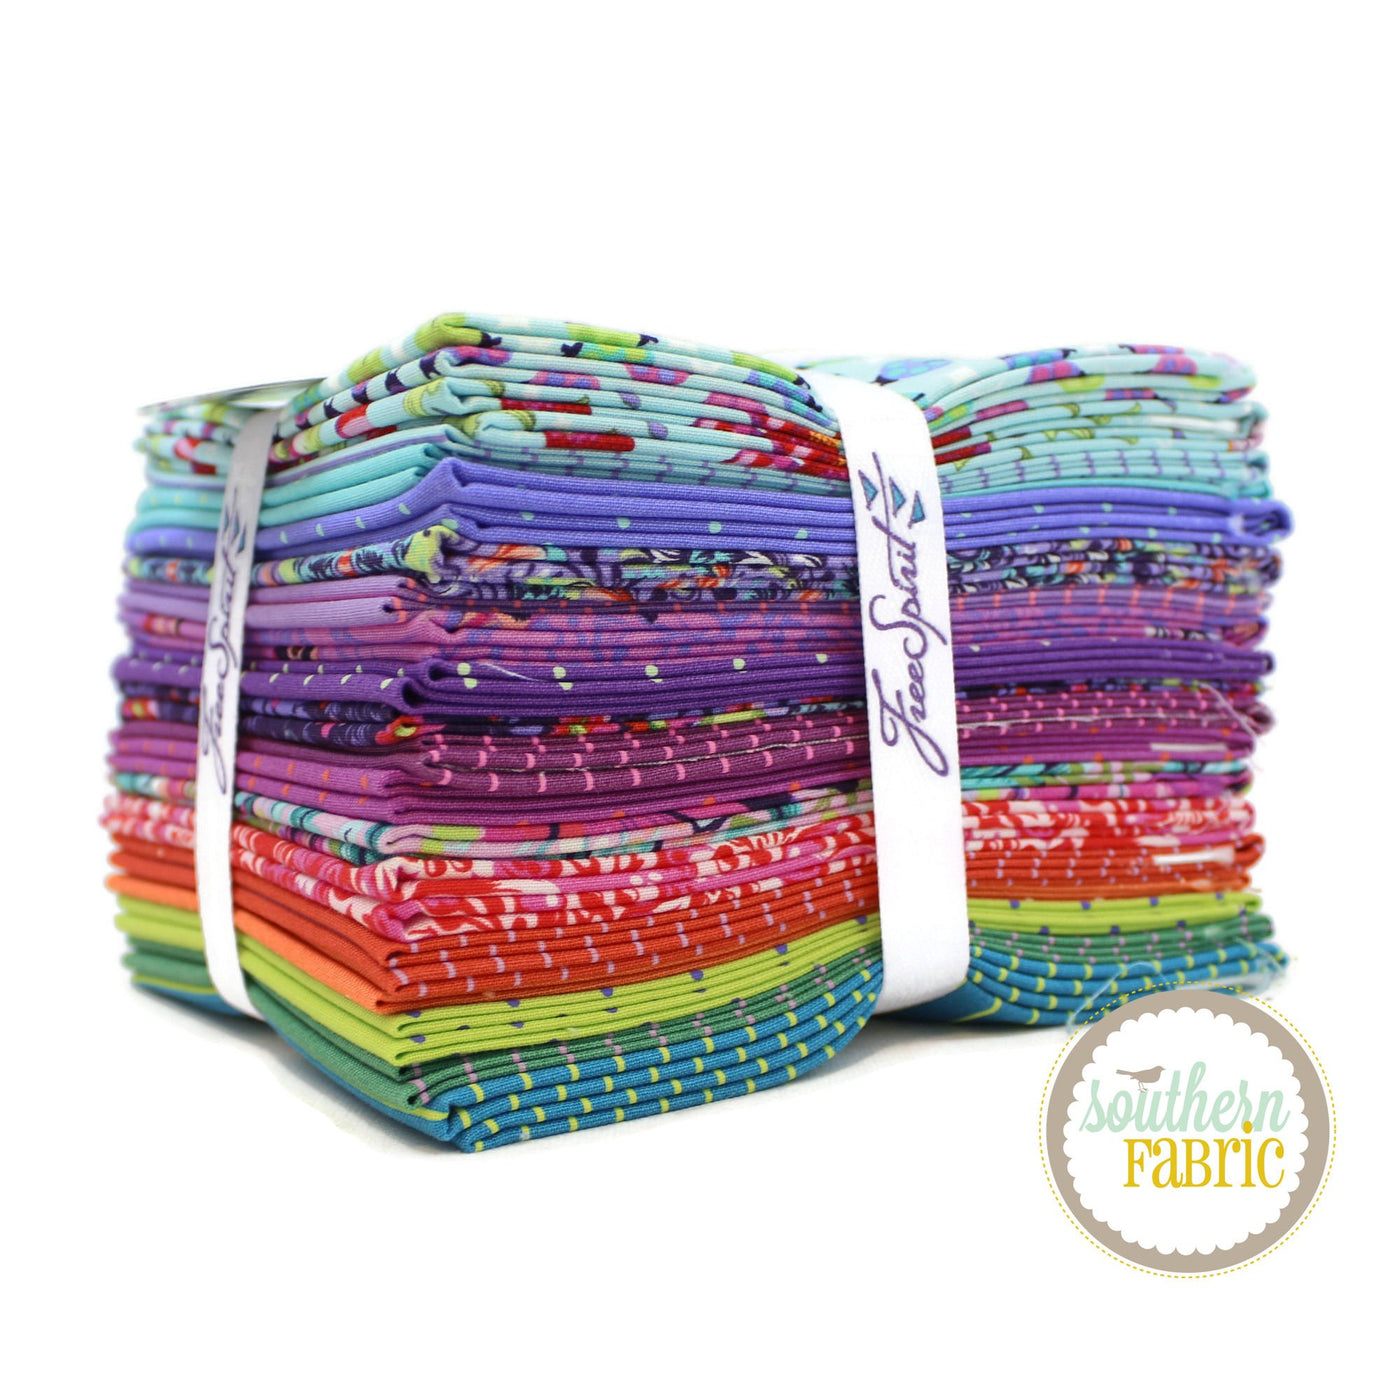 Tiny Beasts - Glimmer Fat Quarter Bundle (19 pcs) by Tula Pink for Free Spirit